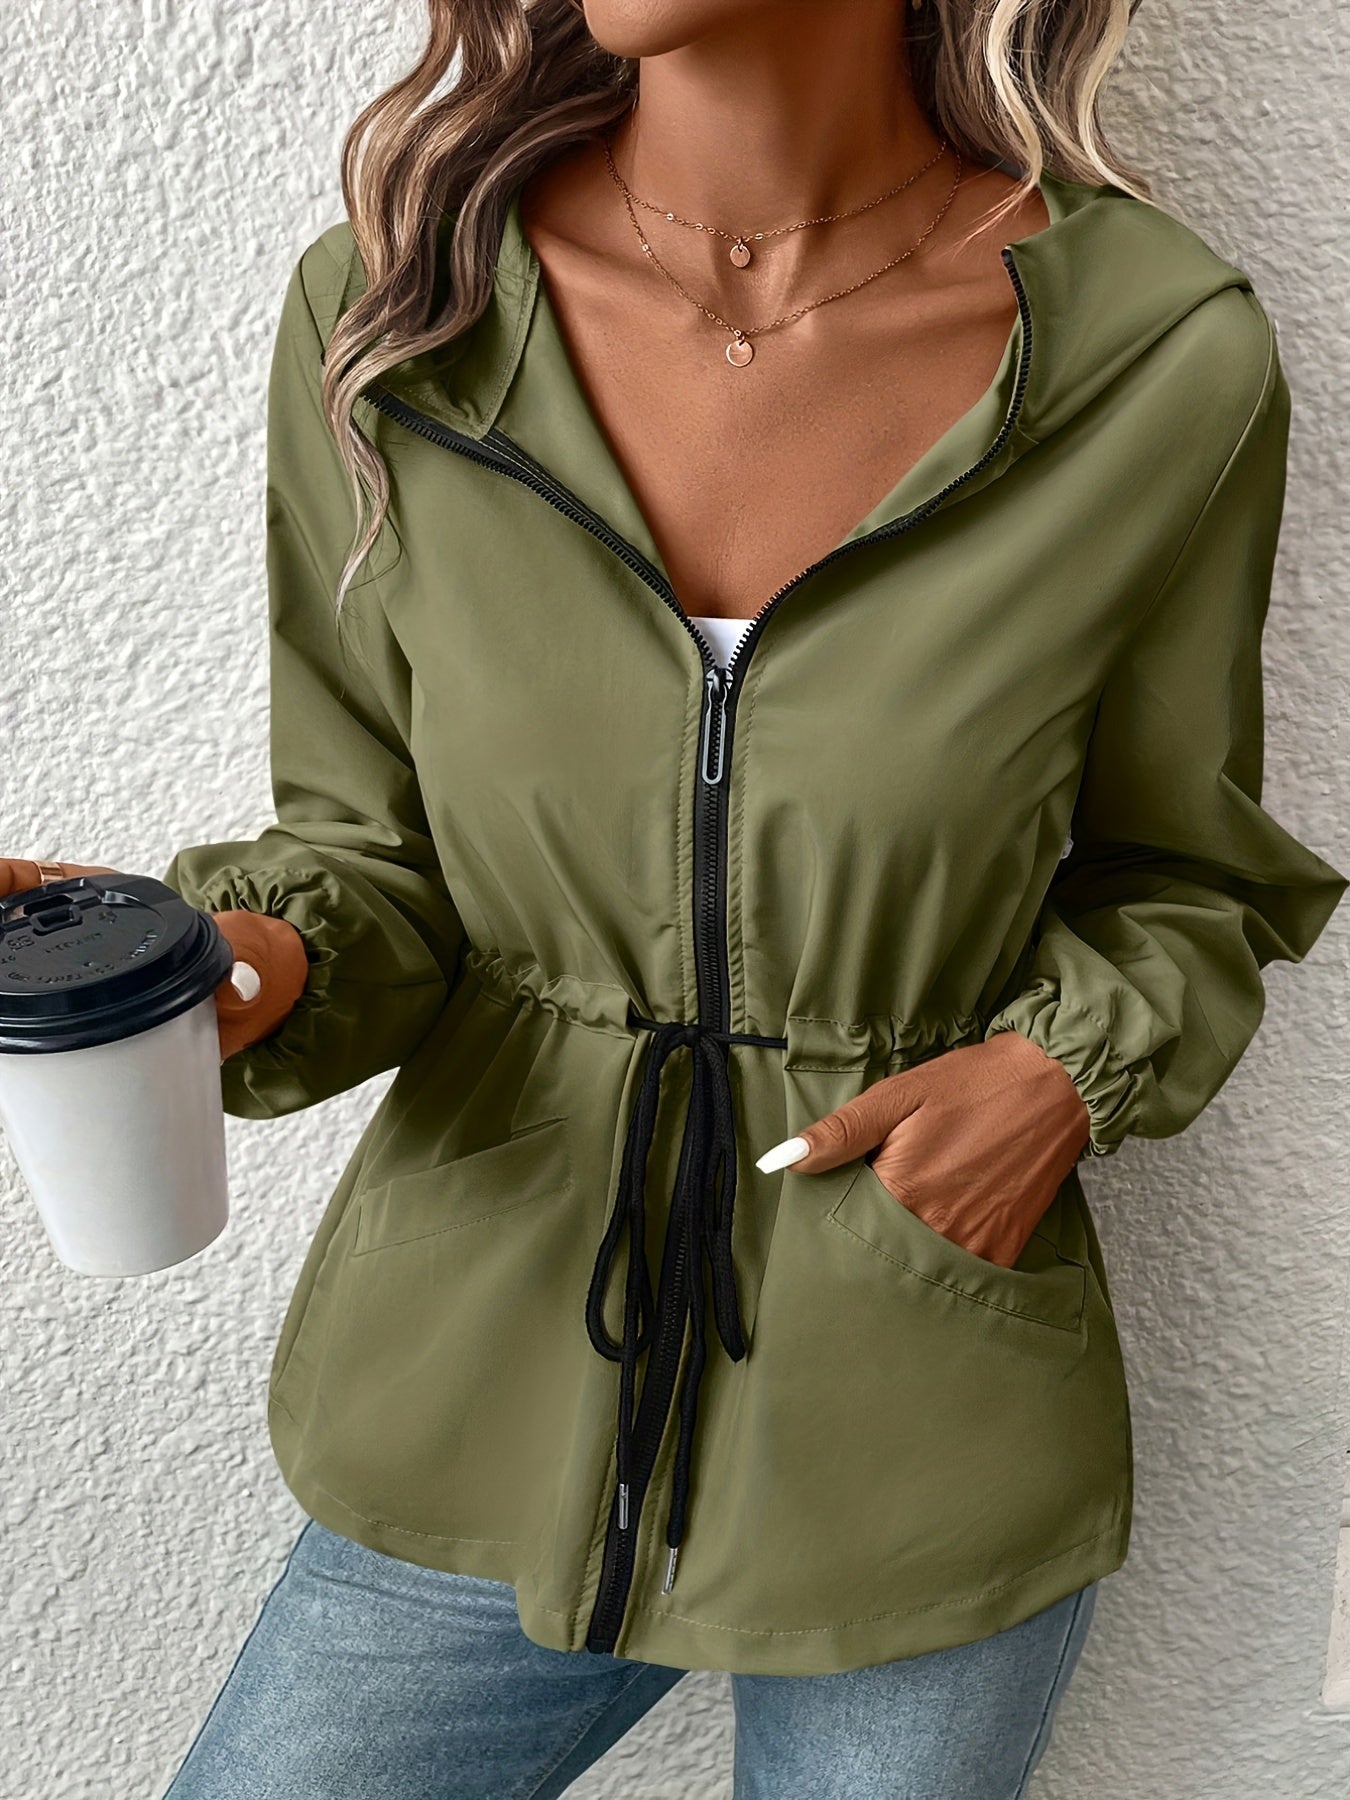 xieyinshe Solid Drawstring Windproof Jacket, Casual Long Sleeve Hooded Zip Up Outerwear With Pockets, Women's Clothing